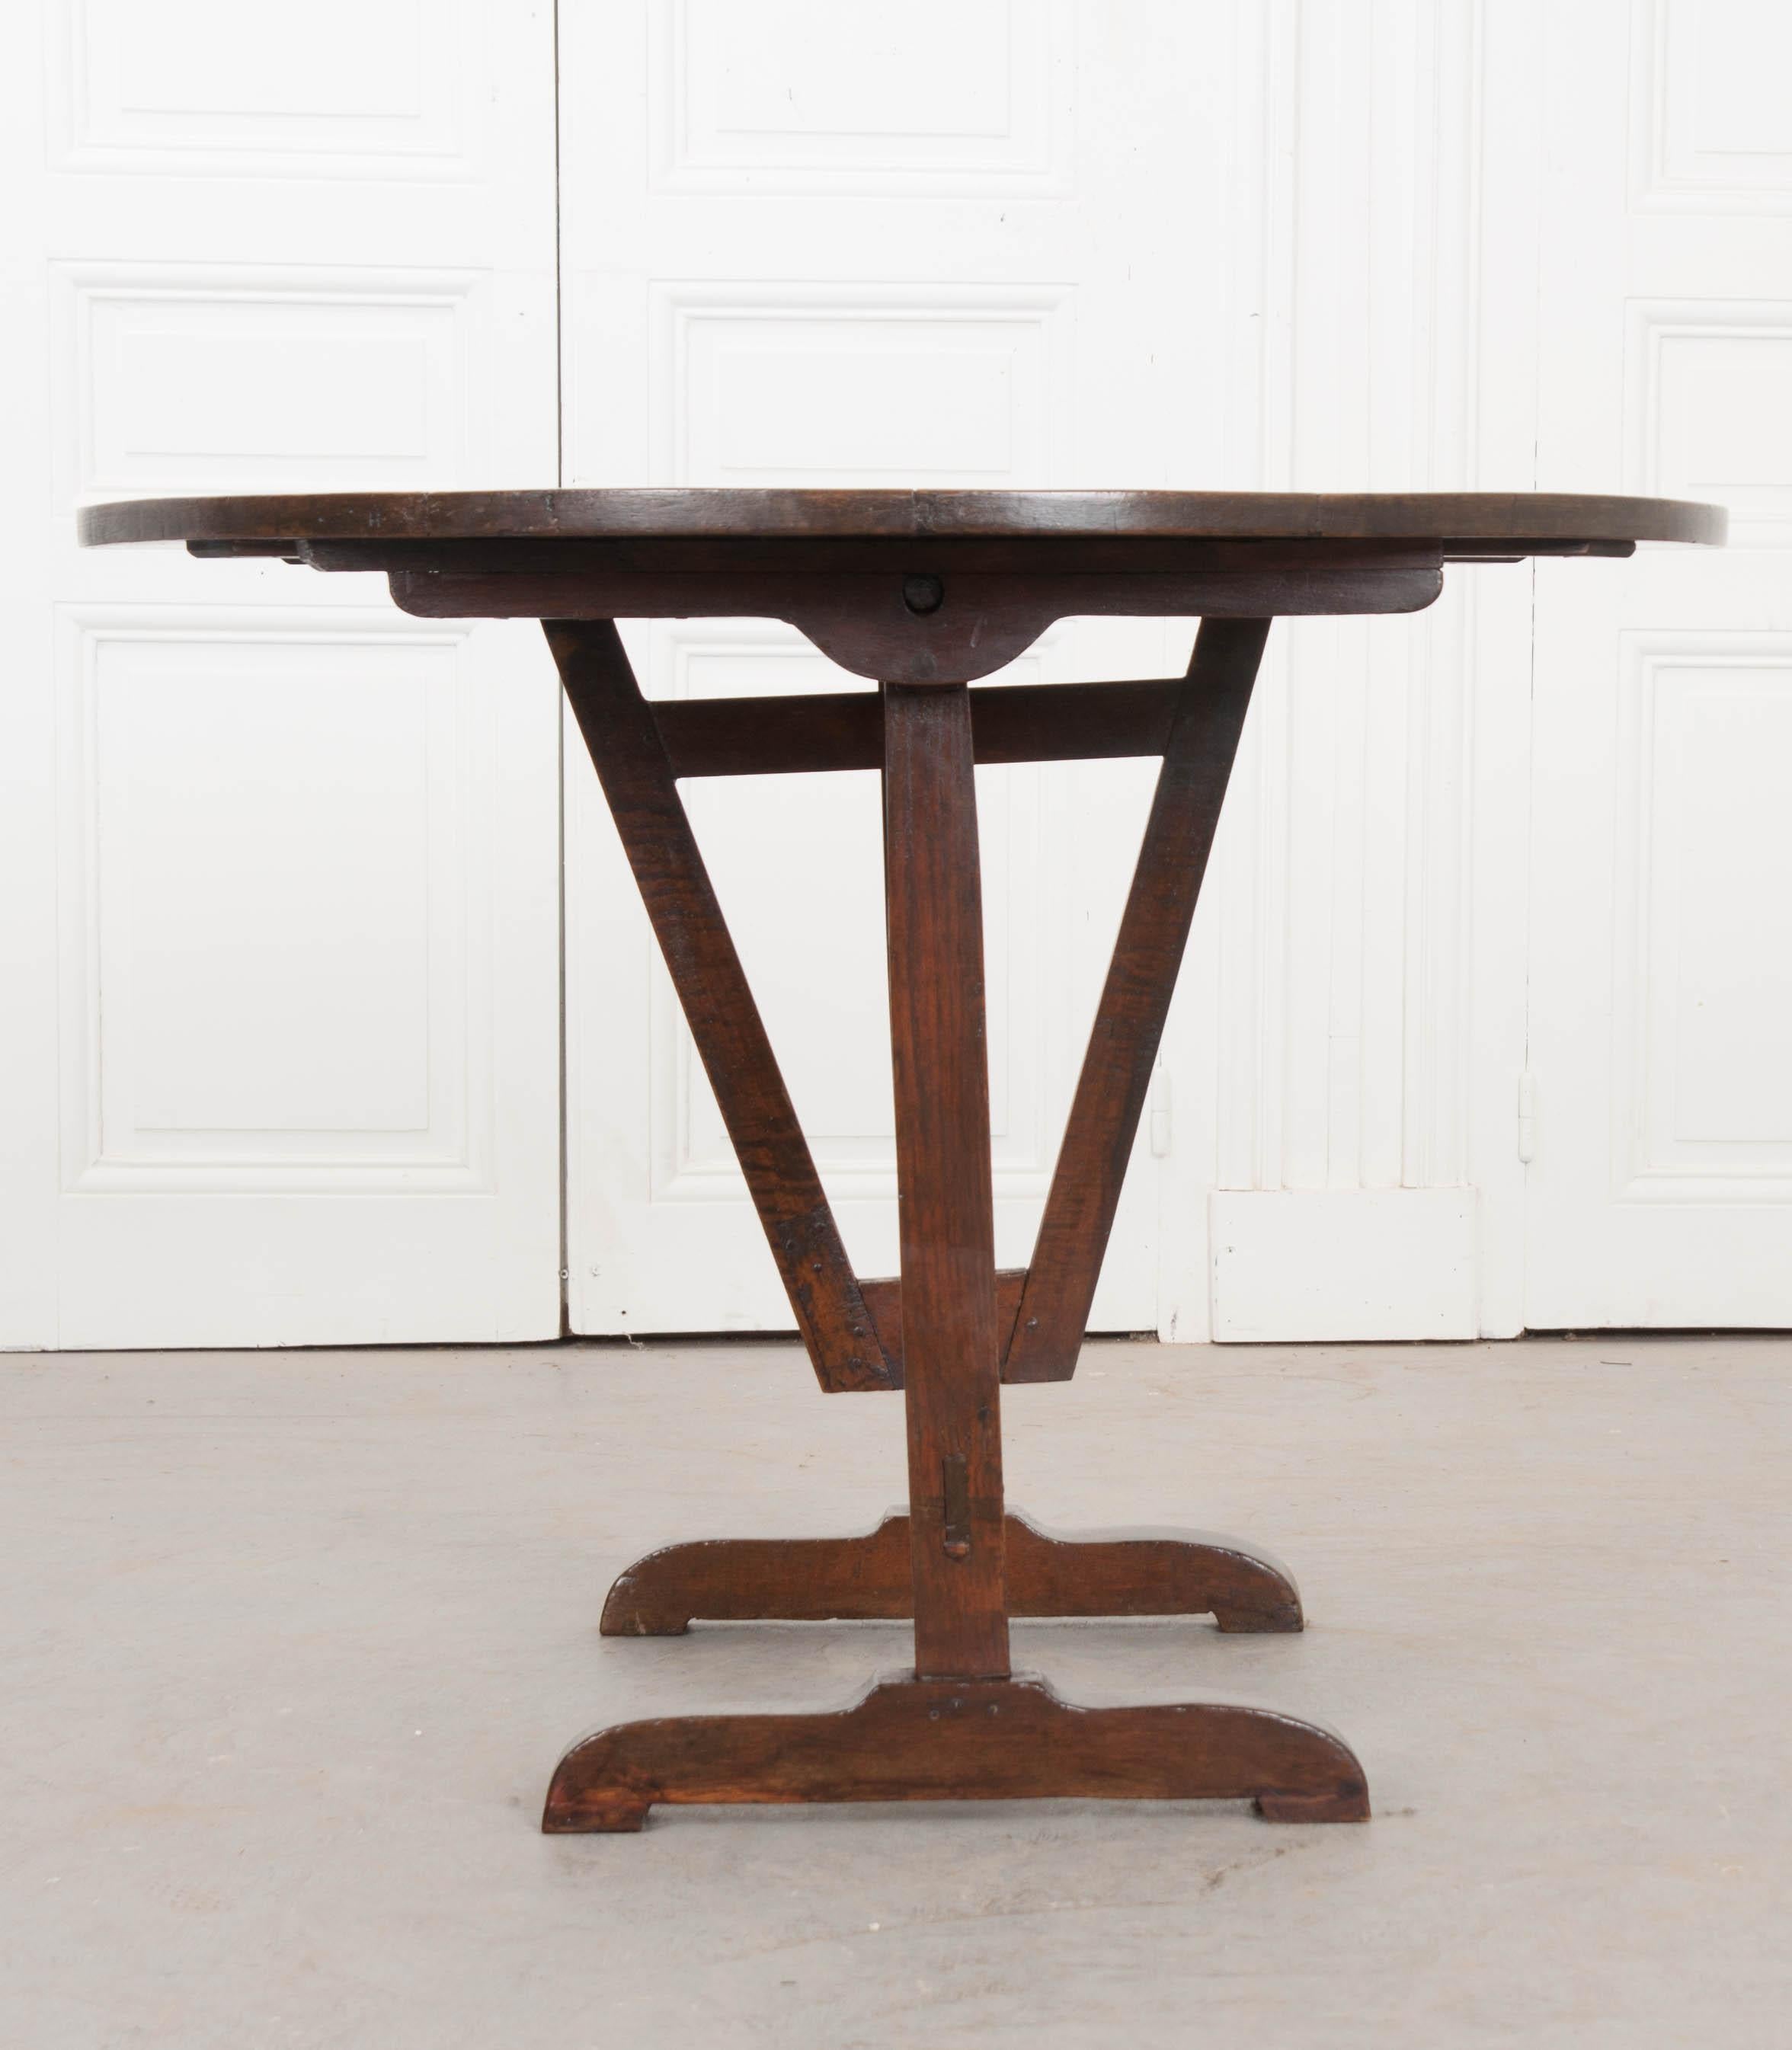 Beloved by novices and connoisseurs alike, wine tasters tables are extraordinarily functional and versatile pieces of furniture. This large, solid walnut-top table is in outstanding condition and very sturdy when laid down, thanks to its cleverly